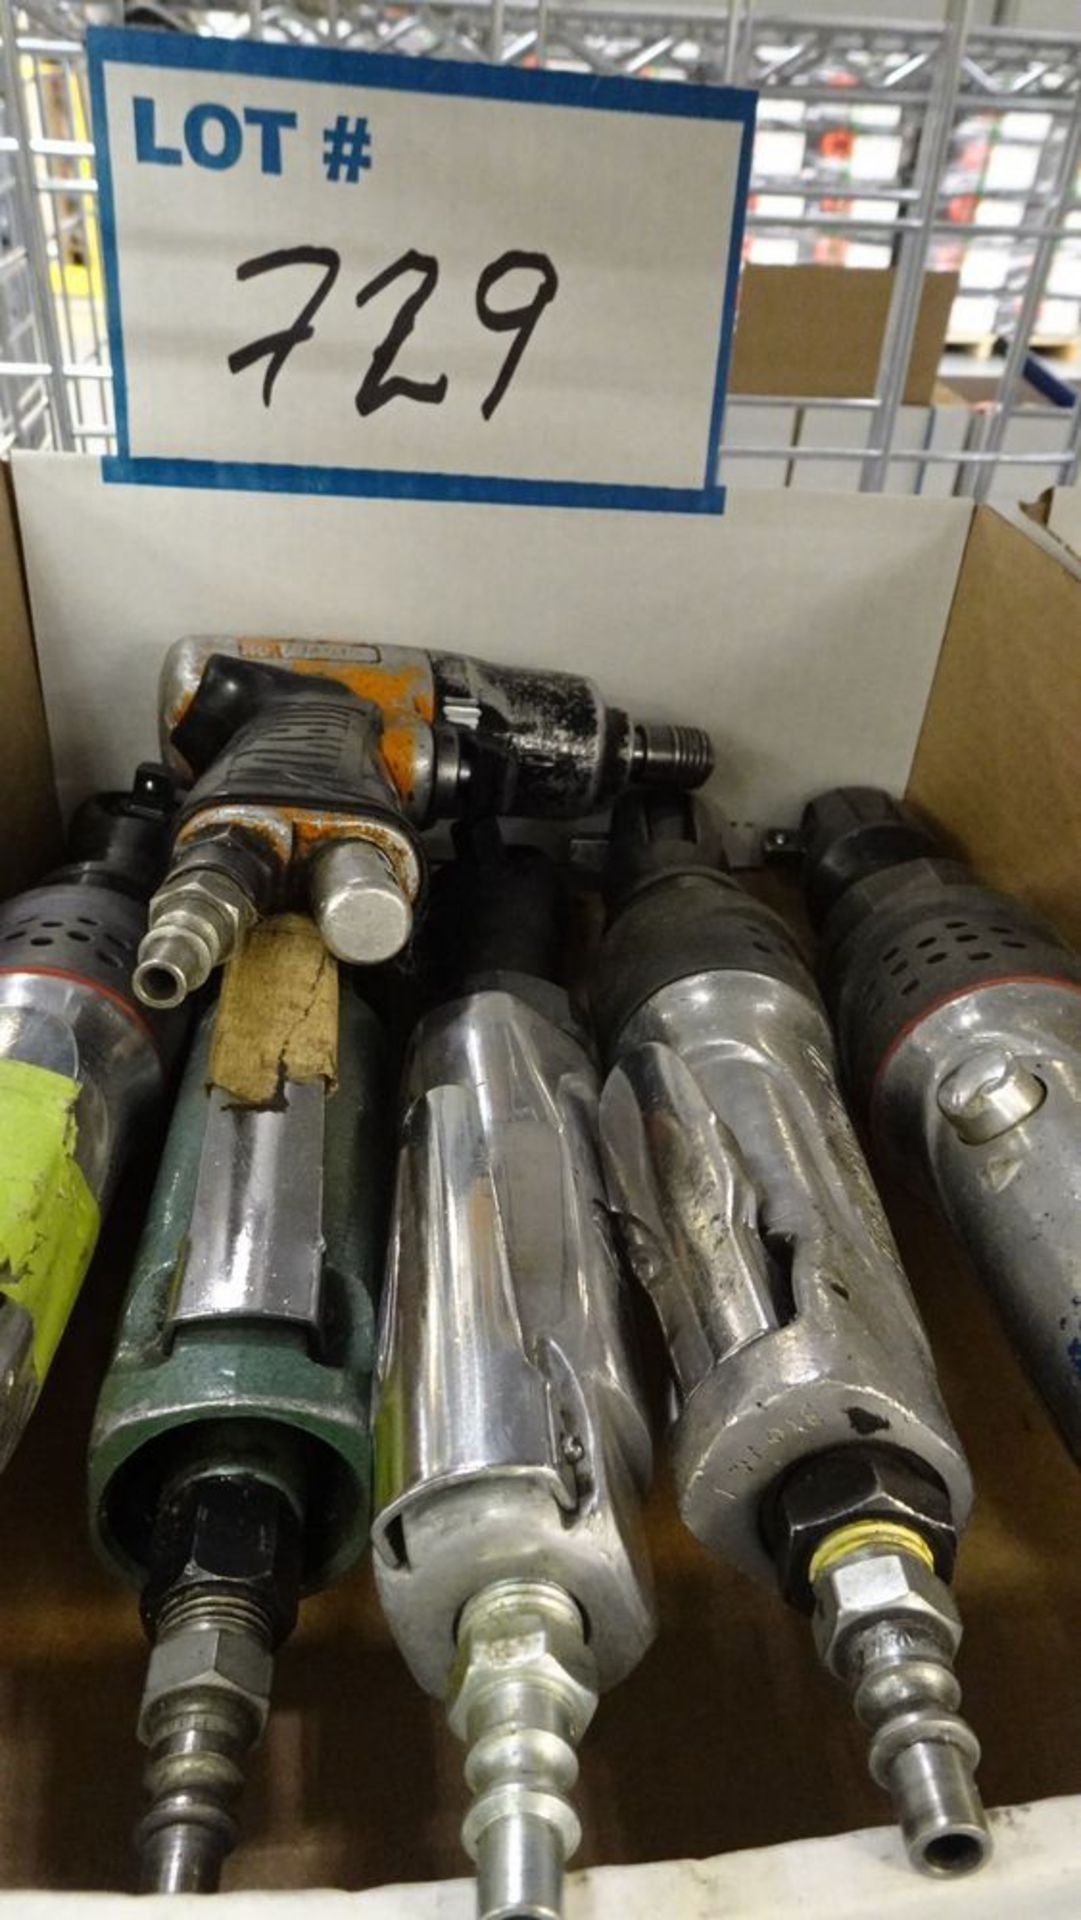 LOT PNEUMATIC RECIPROCATING SAWS, GRINDER, DRILLS, STAPLERS (5 BOXES) (REUTER) - Image 6 of 6